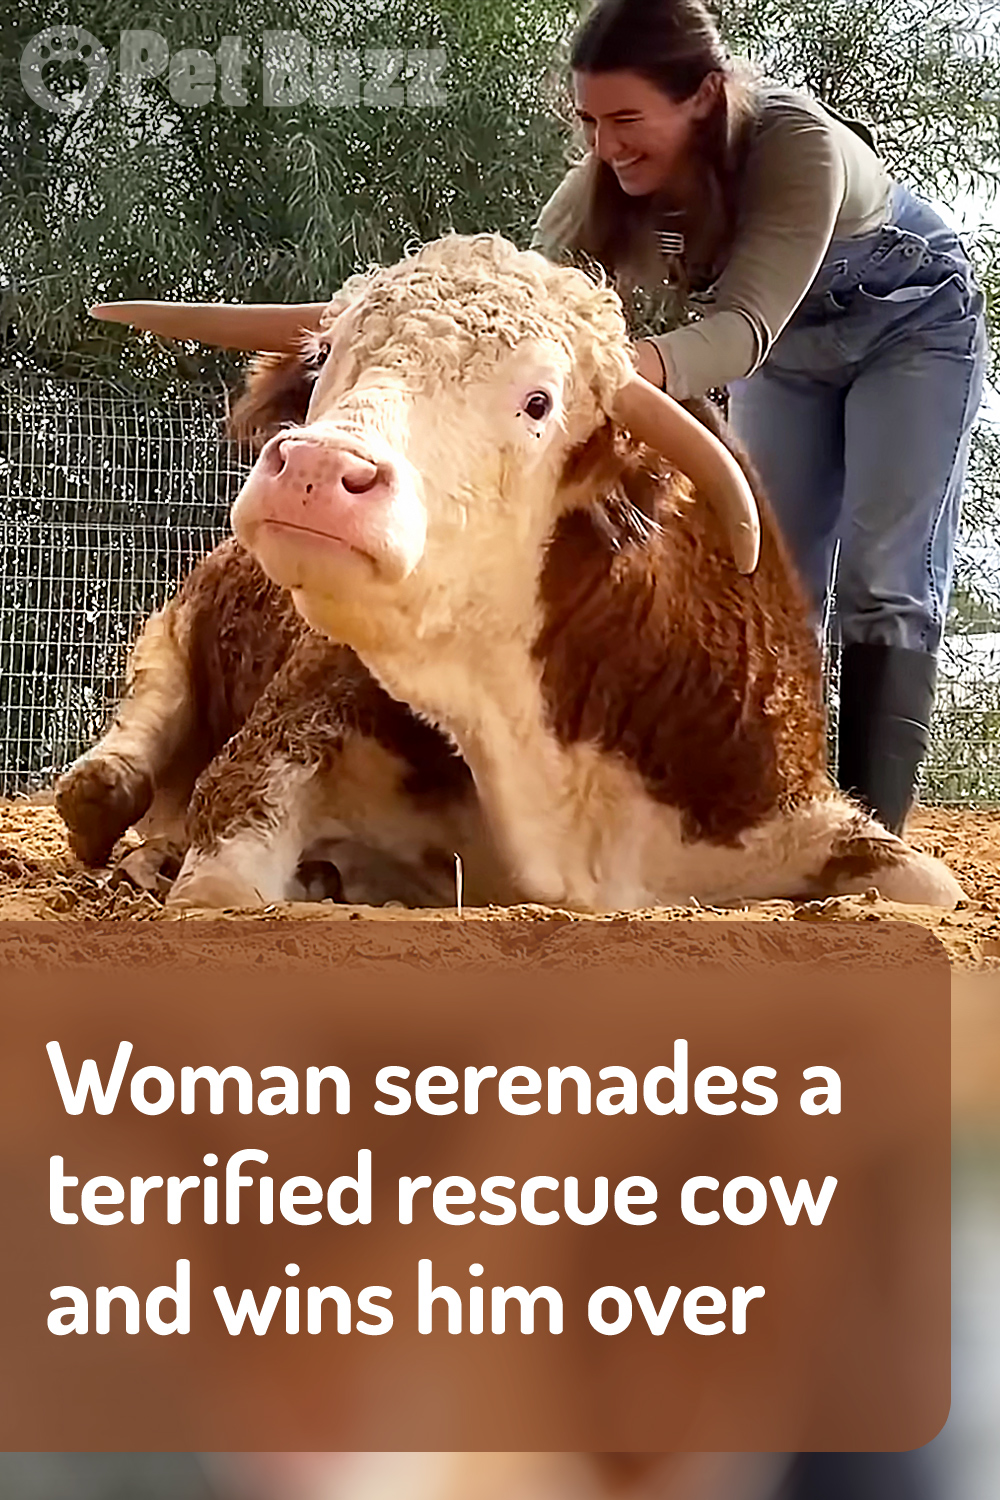 Woman serenades a terrified rescue cow and wins him over